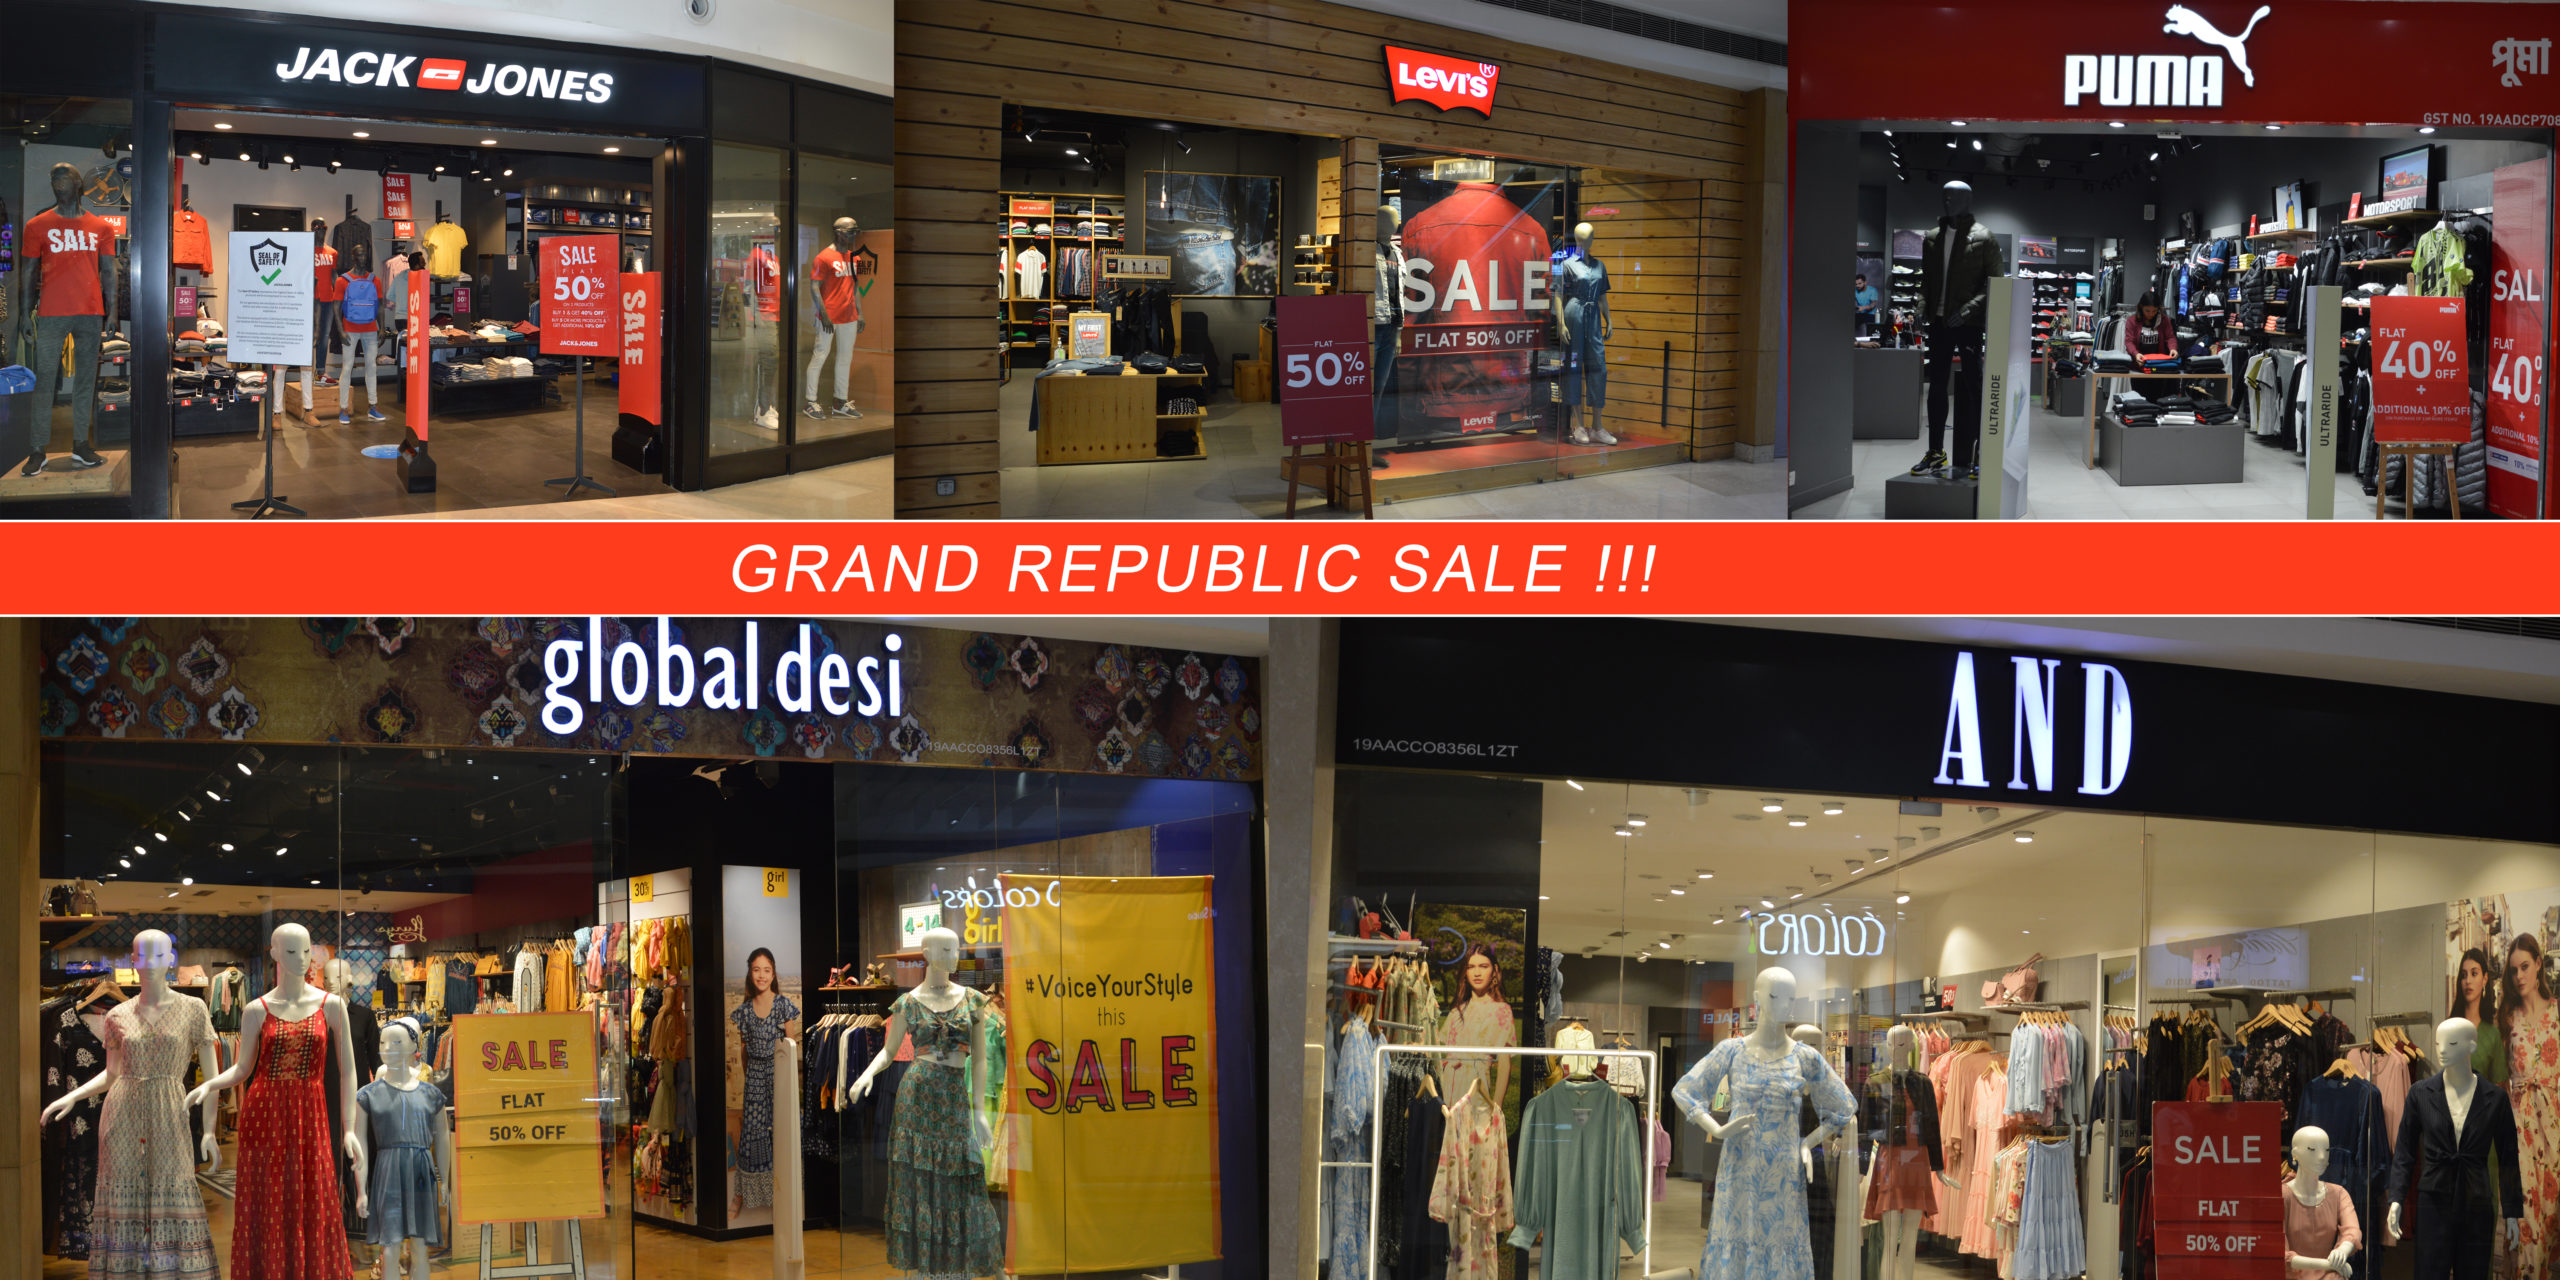 SPLURGE & ENJOY YOUR REPUBLIC DAY SHOPPING SPREE WITH GRAND REPUBLIC SALE AT ACROPOLIS MALL